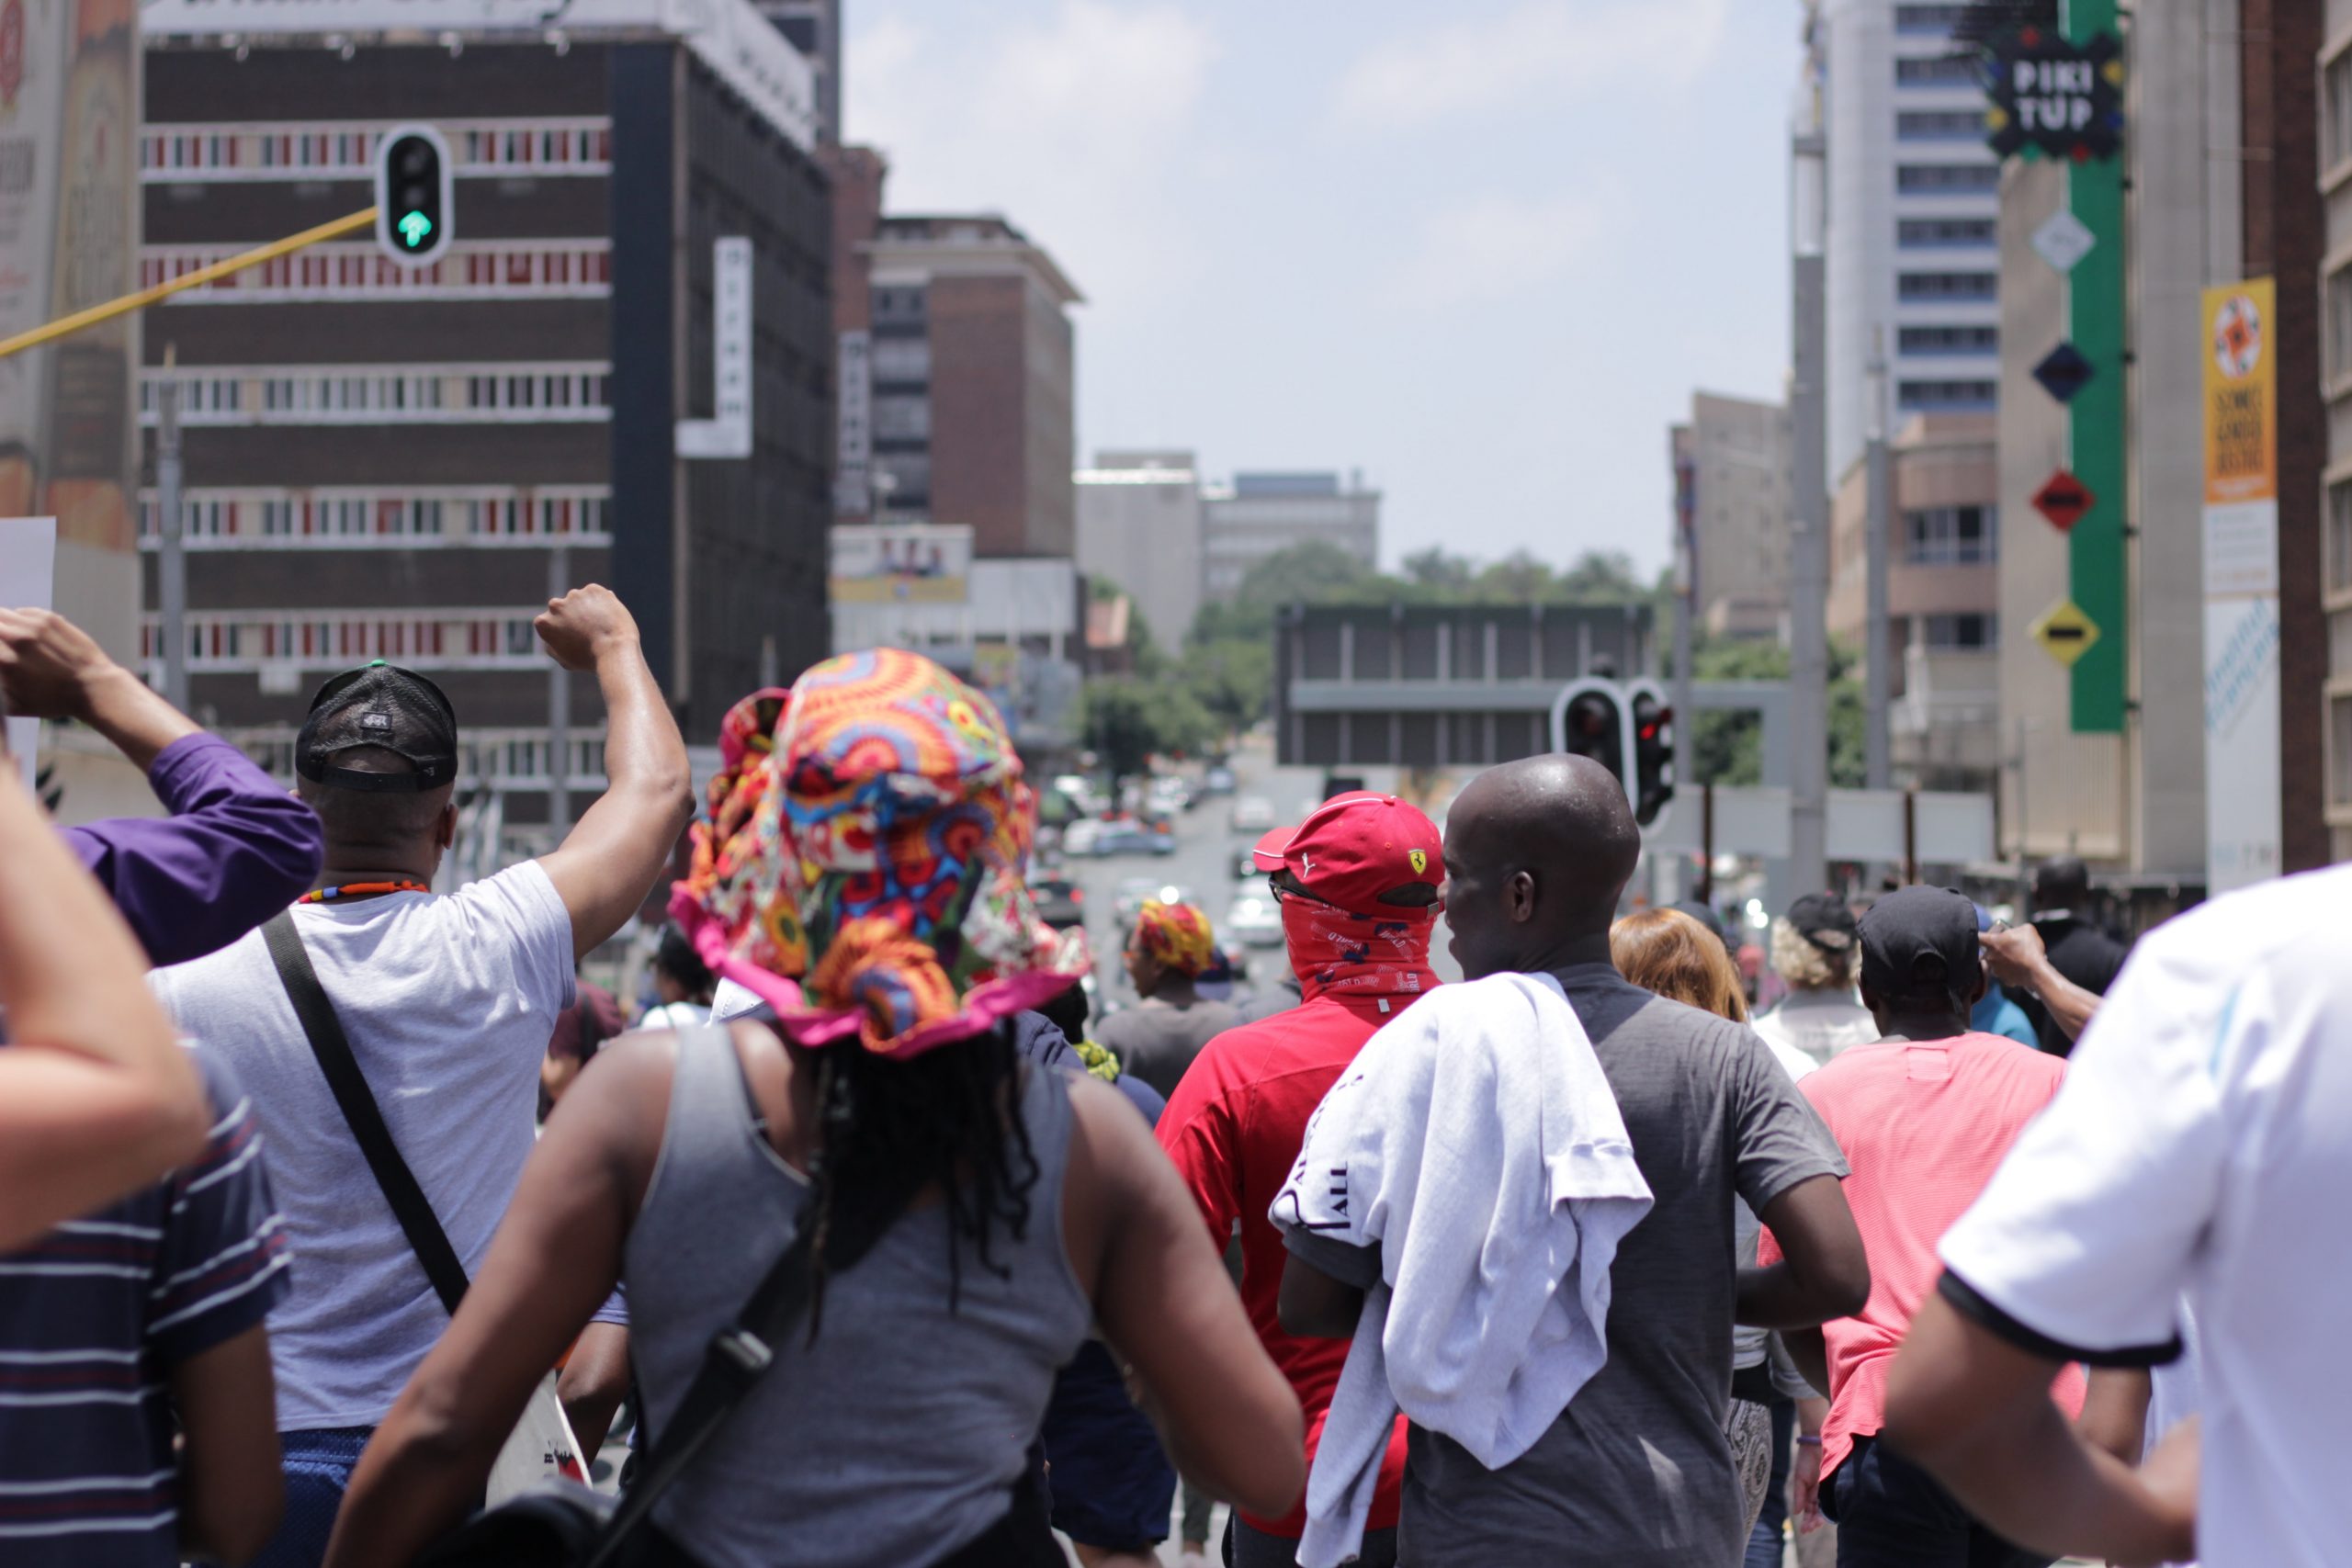 Visionary leadership needed in South Africa to reduce inequality